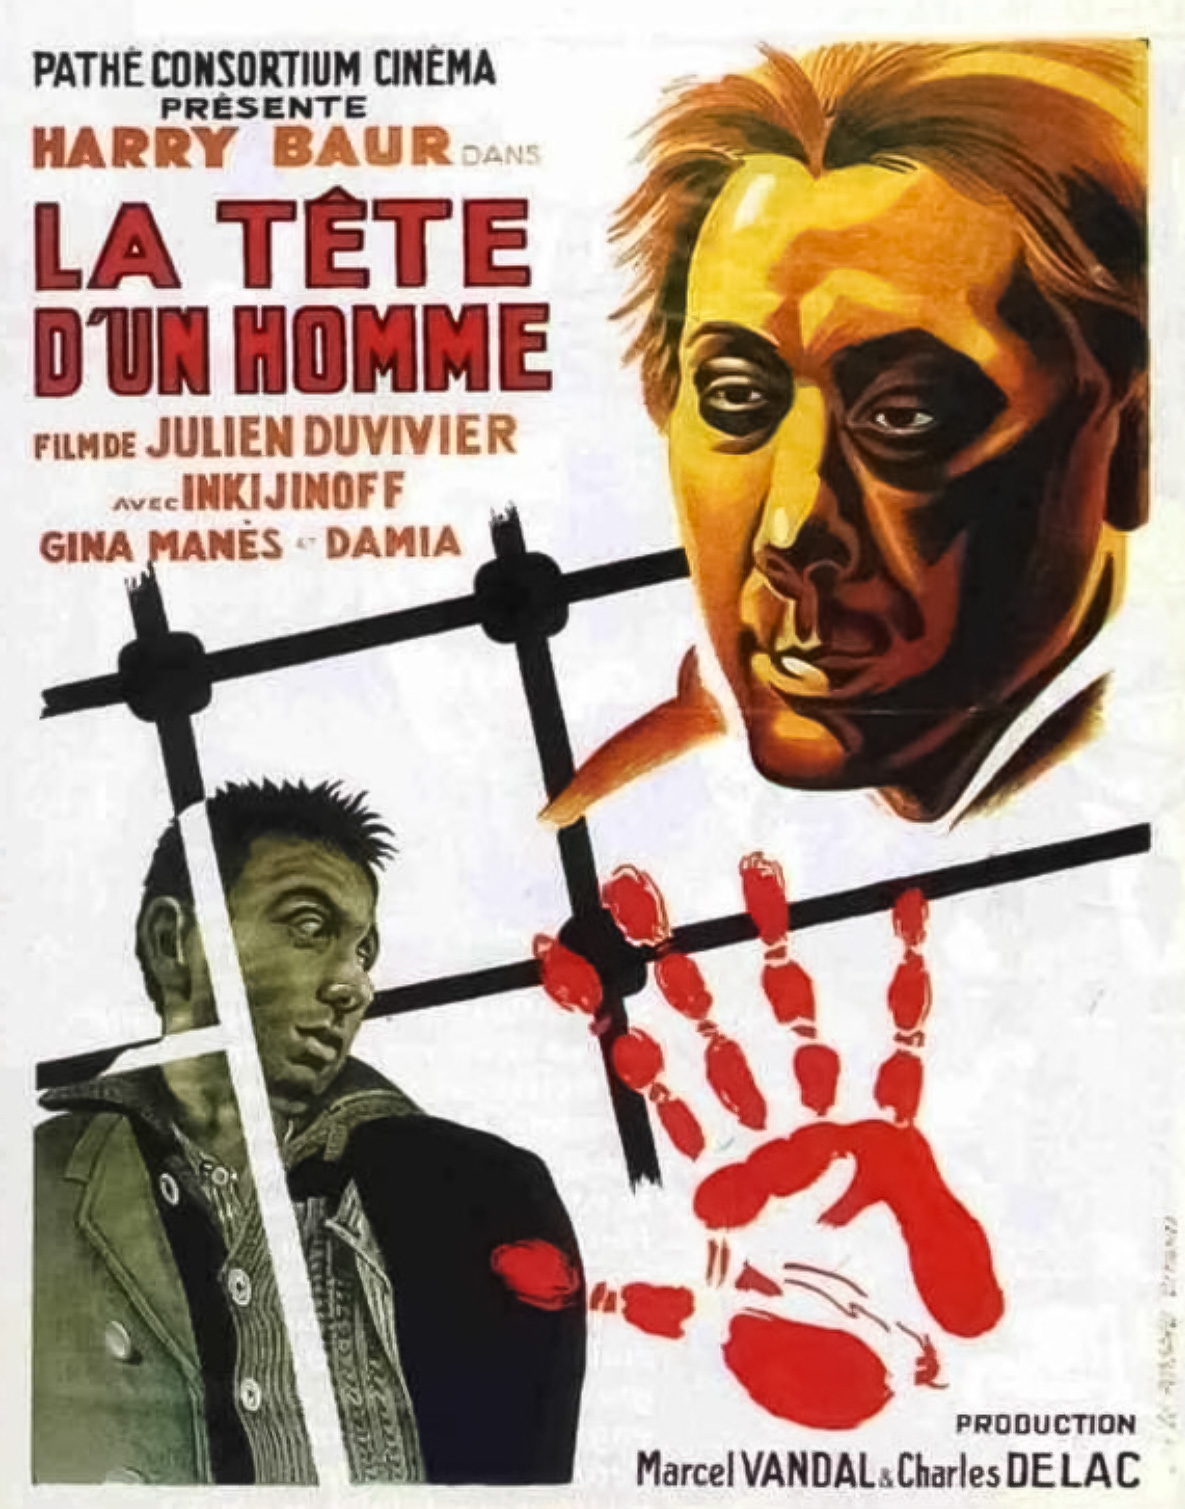 La tête d'un homme (1933) with English Subtitles on DVD on DVD